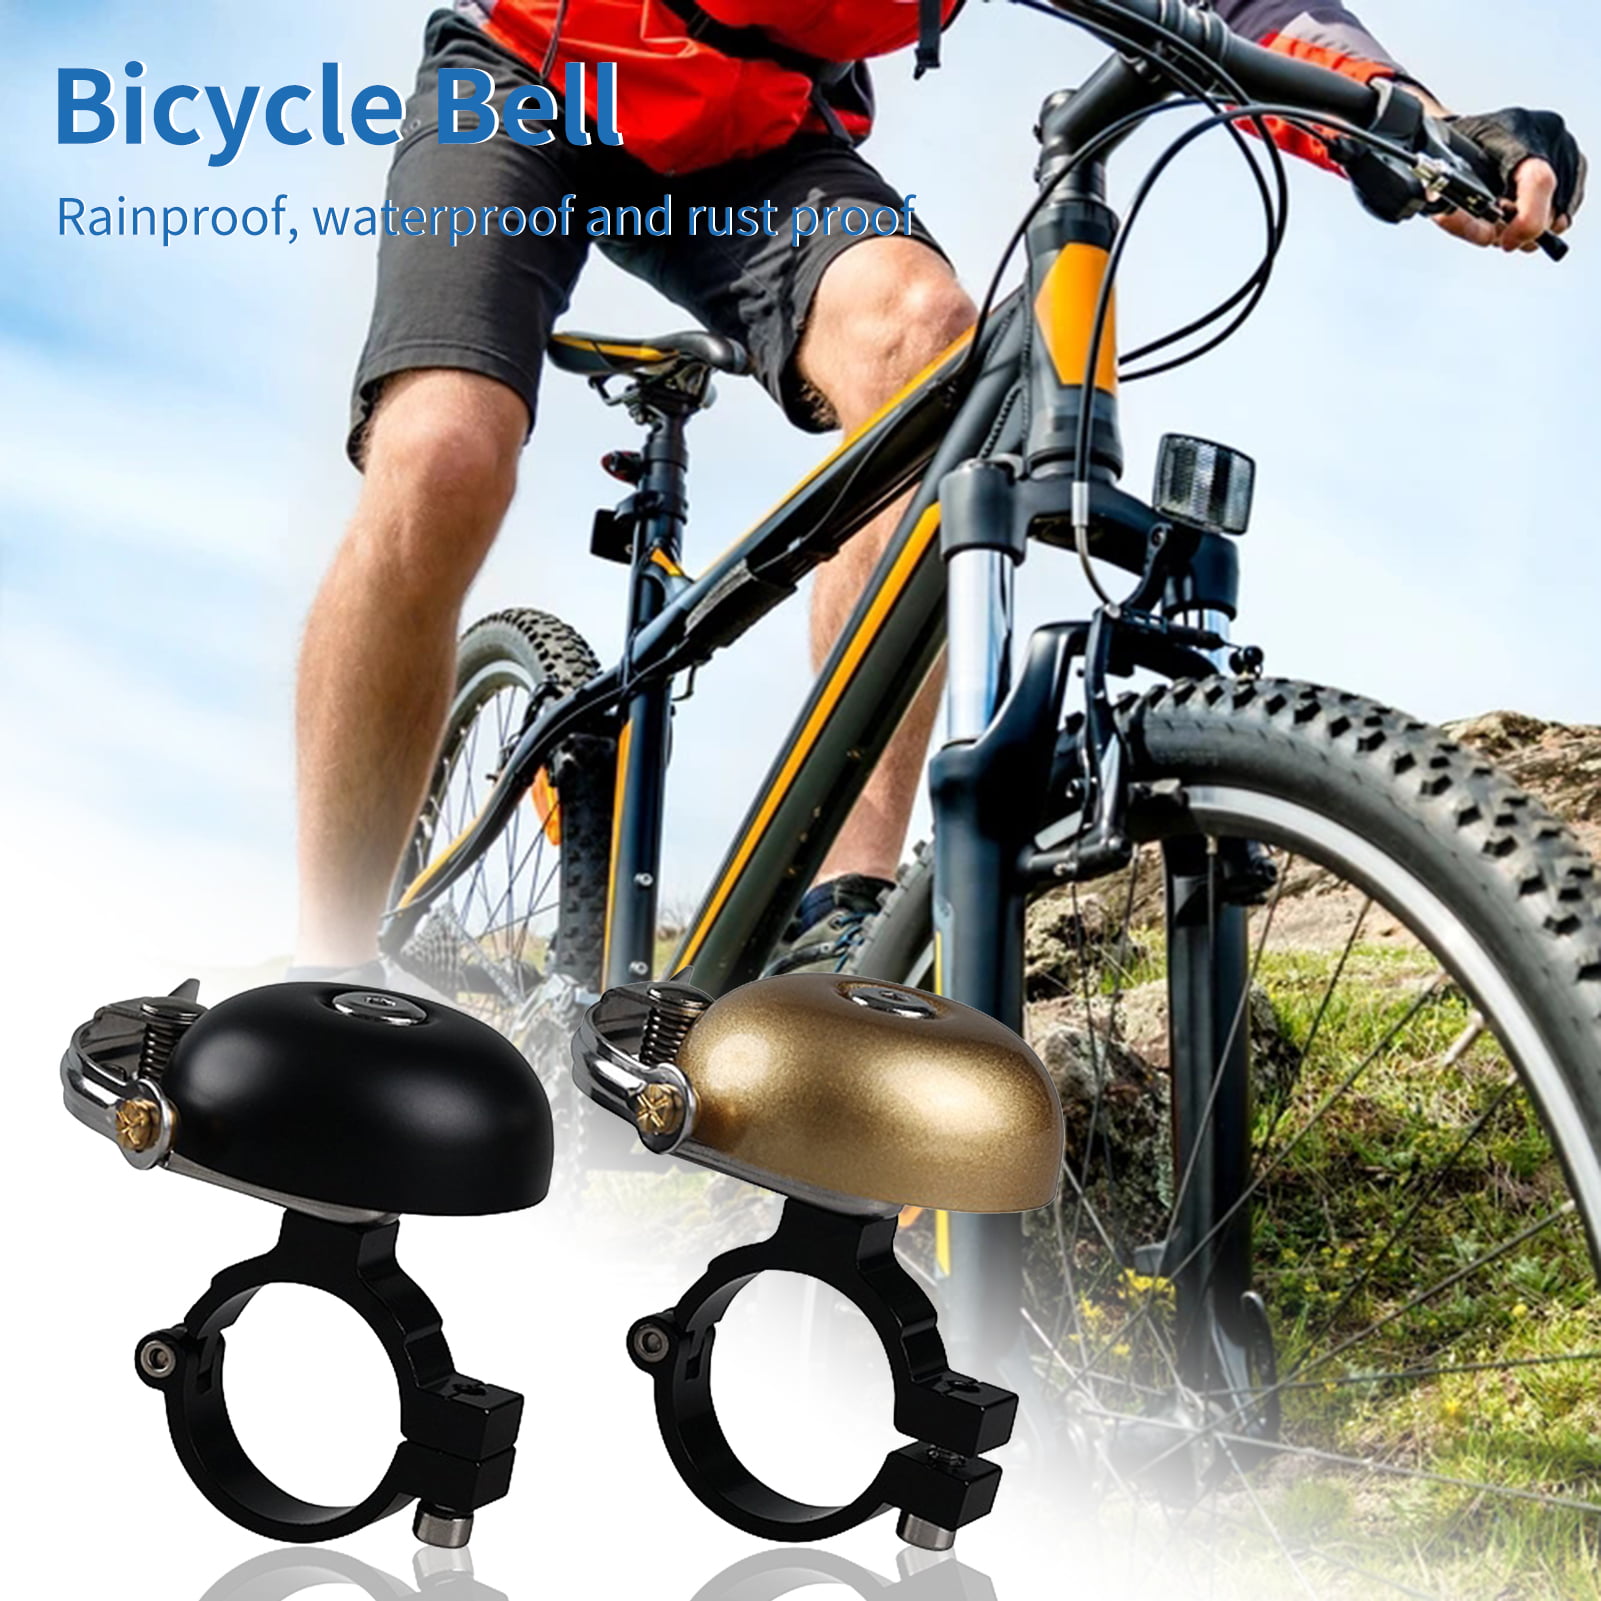 BMX MTB Road Bike 4 Colors Bicycle Bell Durable Bicycle Vintage Brass Bell Handlebar Cycling Loud Sound Alarm Bike Accessory for Mountain Bike 